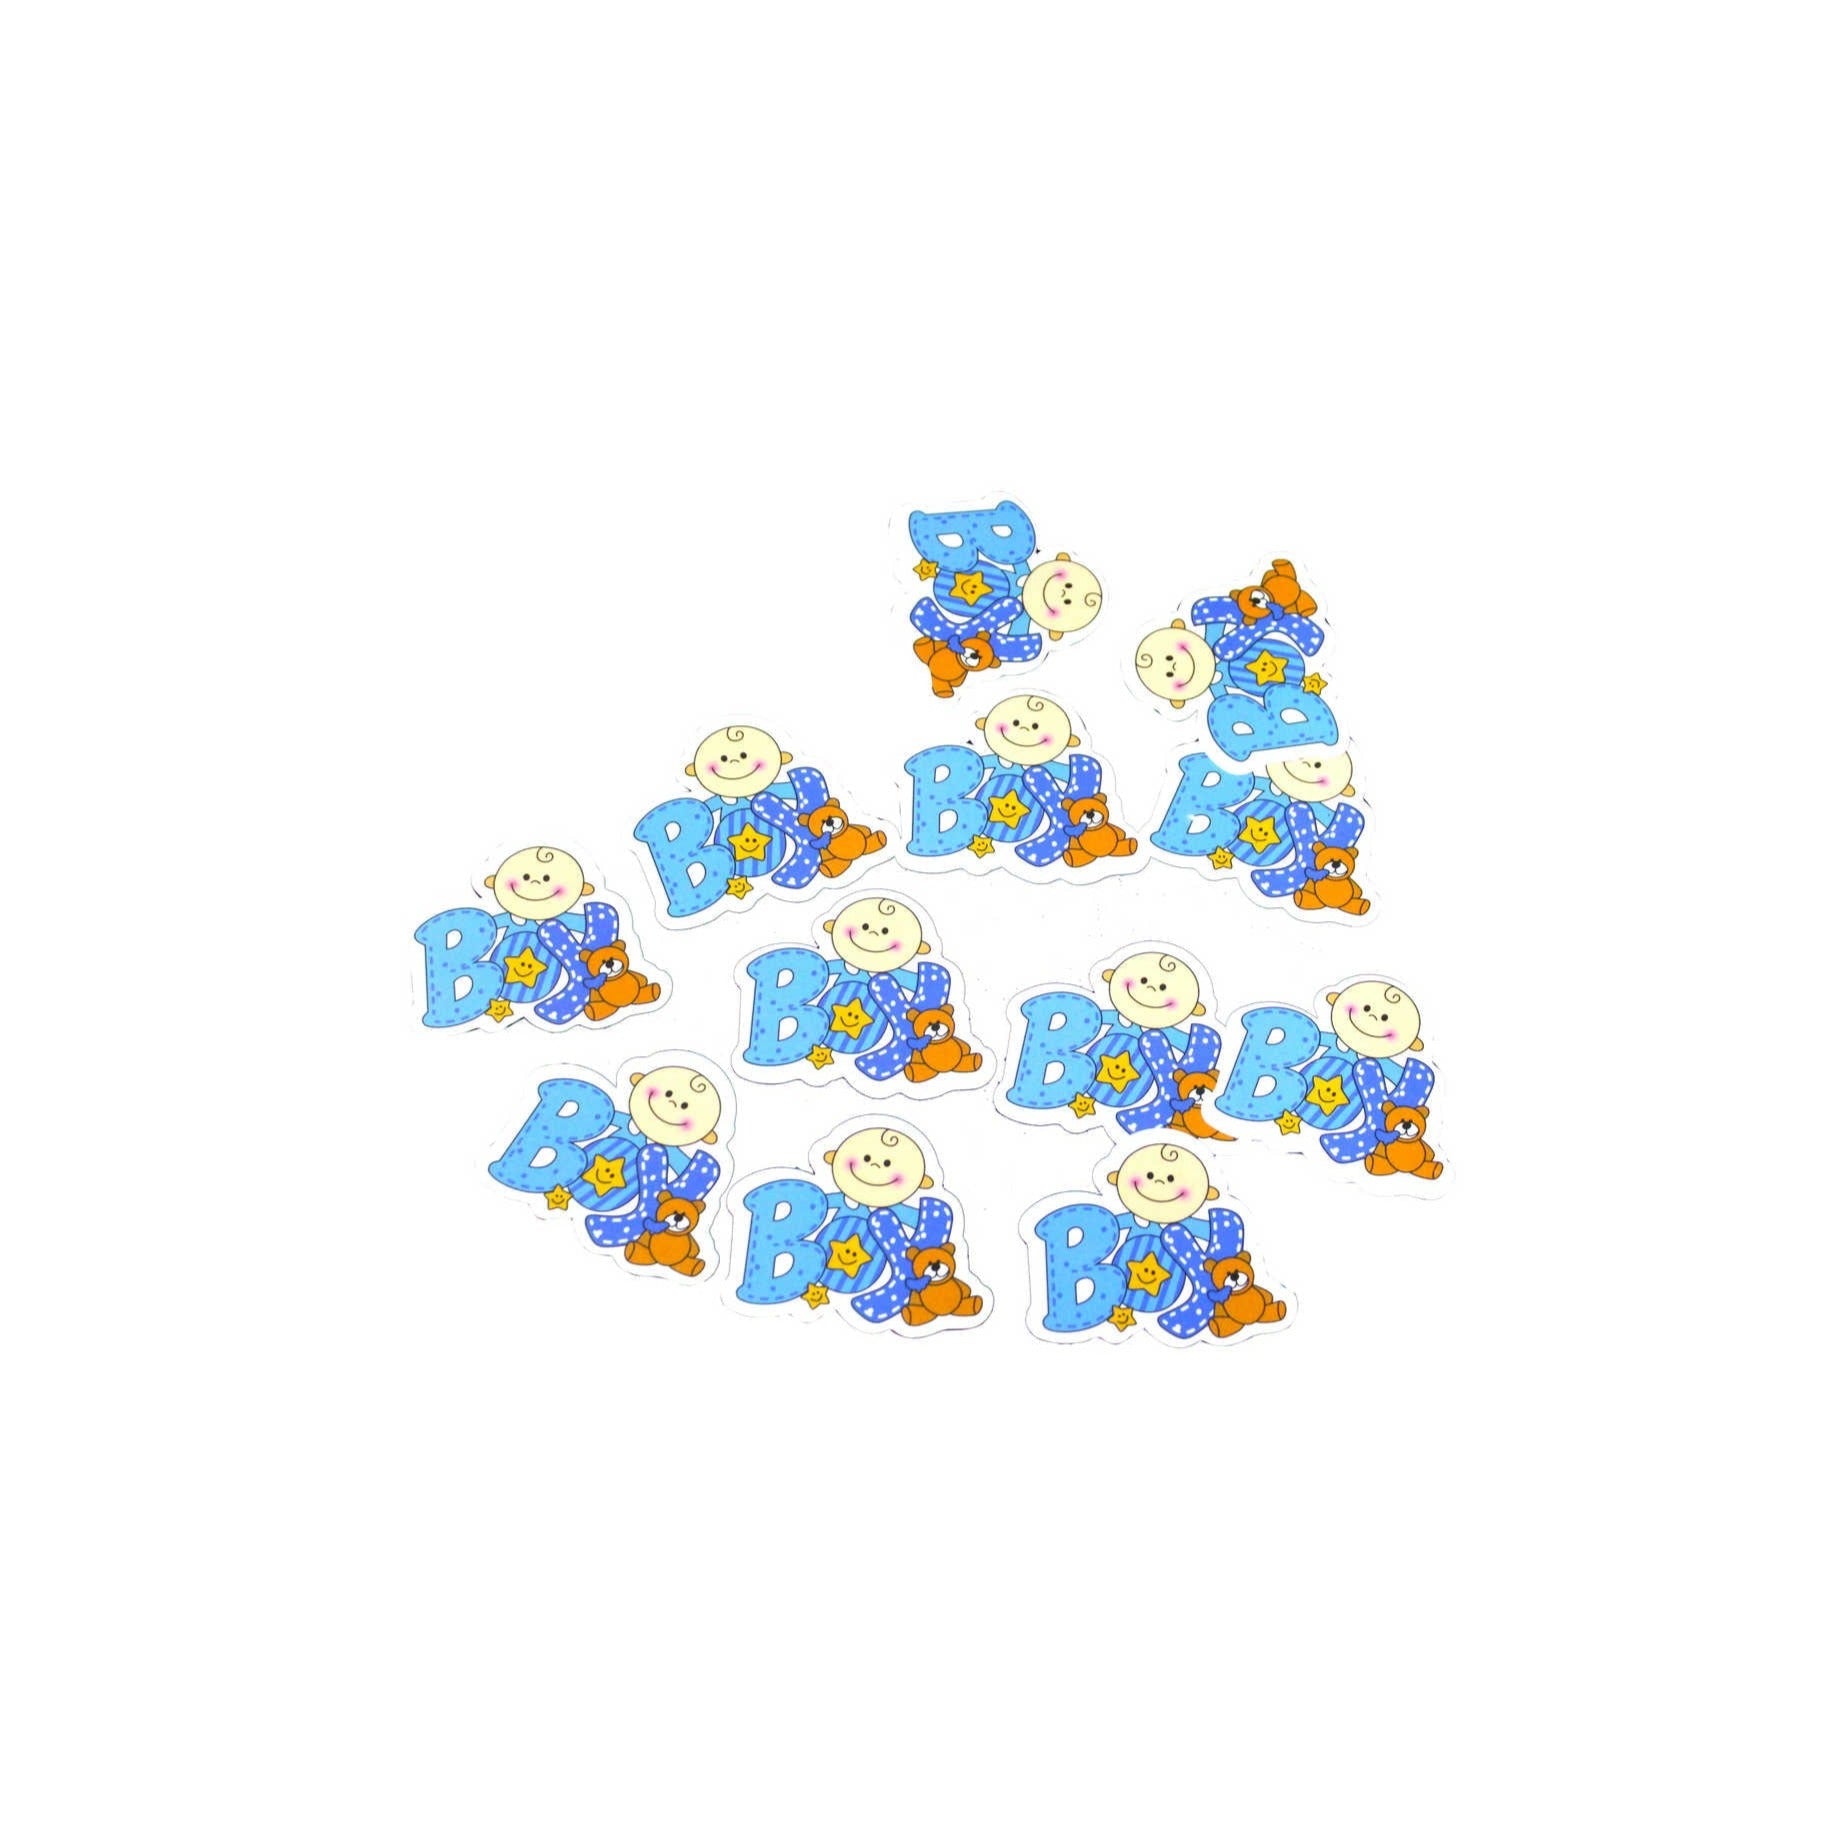 Indian Petals Little Kids Party Hard Cut out Motif for Craft or Decoration - 483, Blue